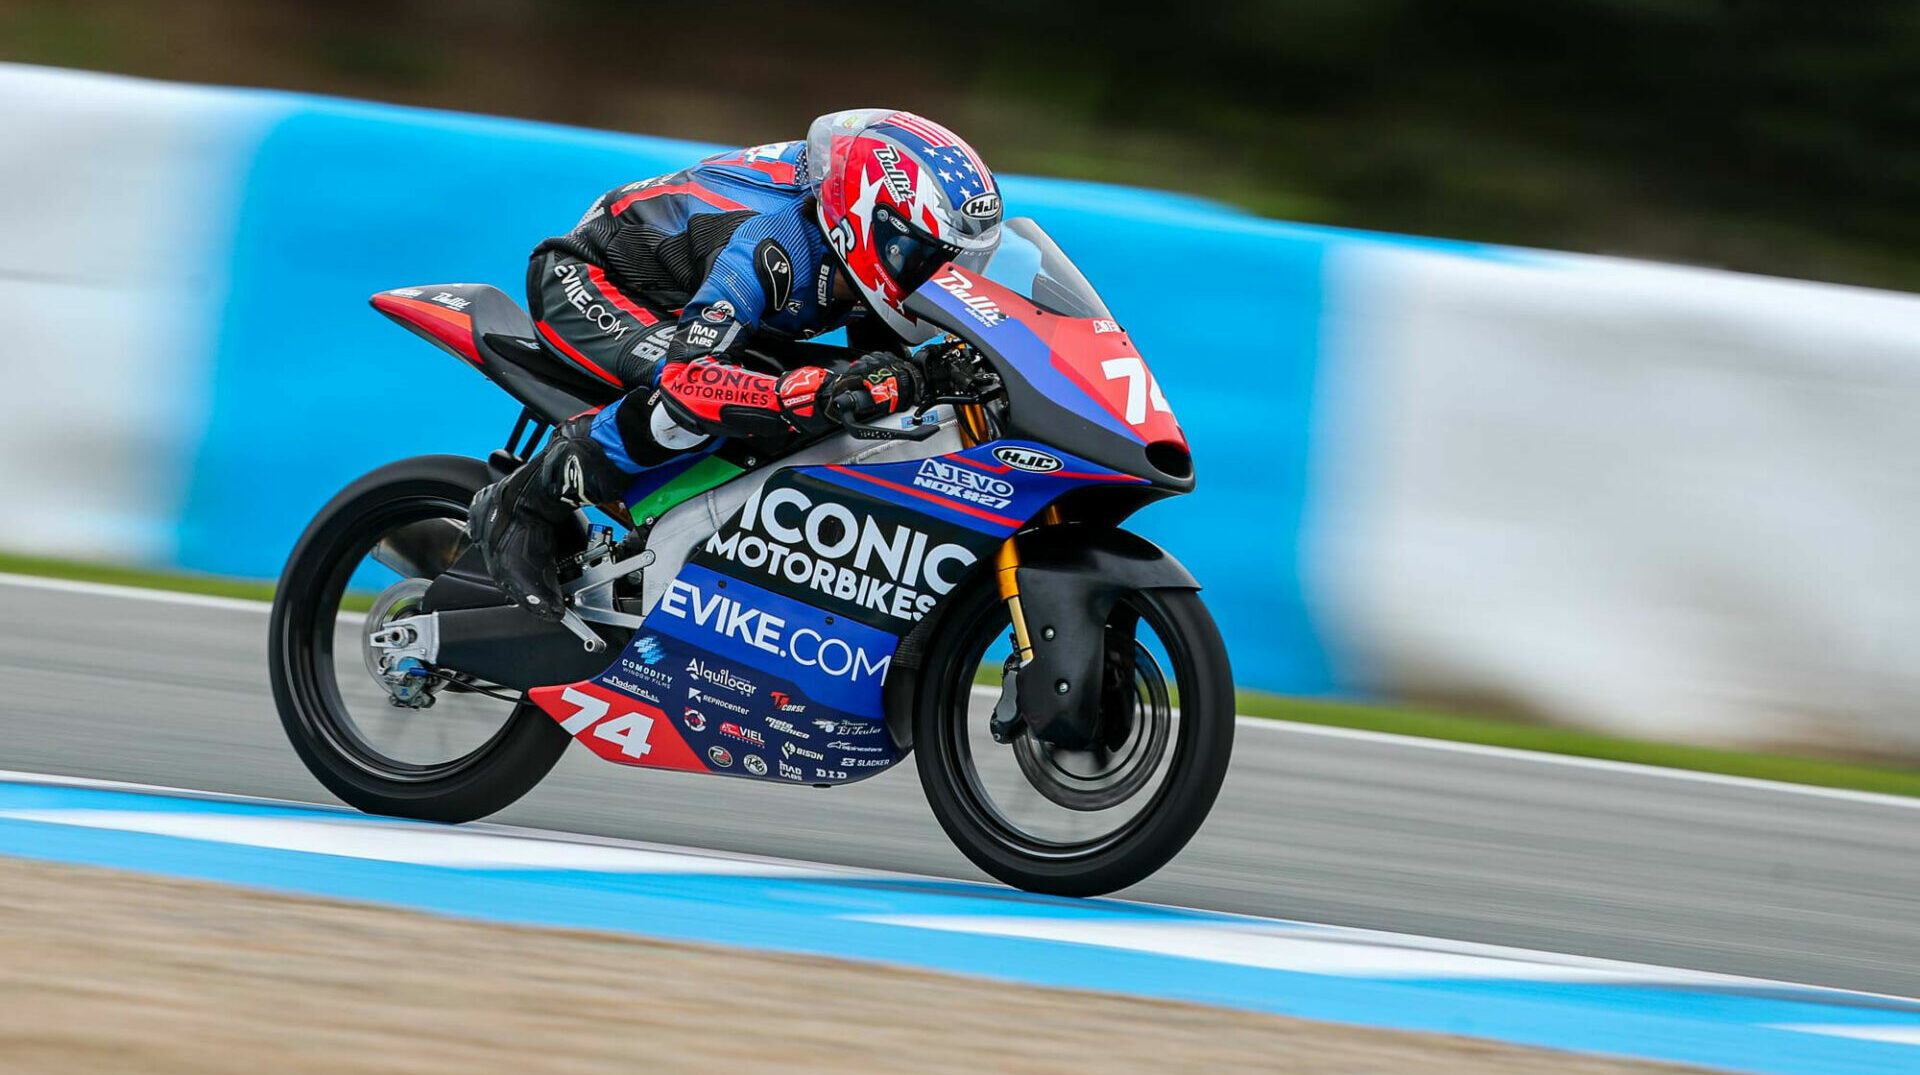 Americans Kensei Matsudaira and Nathan Gouker Make Debut in ESBK Championship in PreMoto3 and Moto4 Categories, Matsudaira with a Top 5 Finish